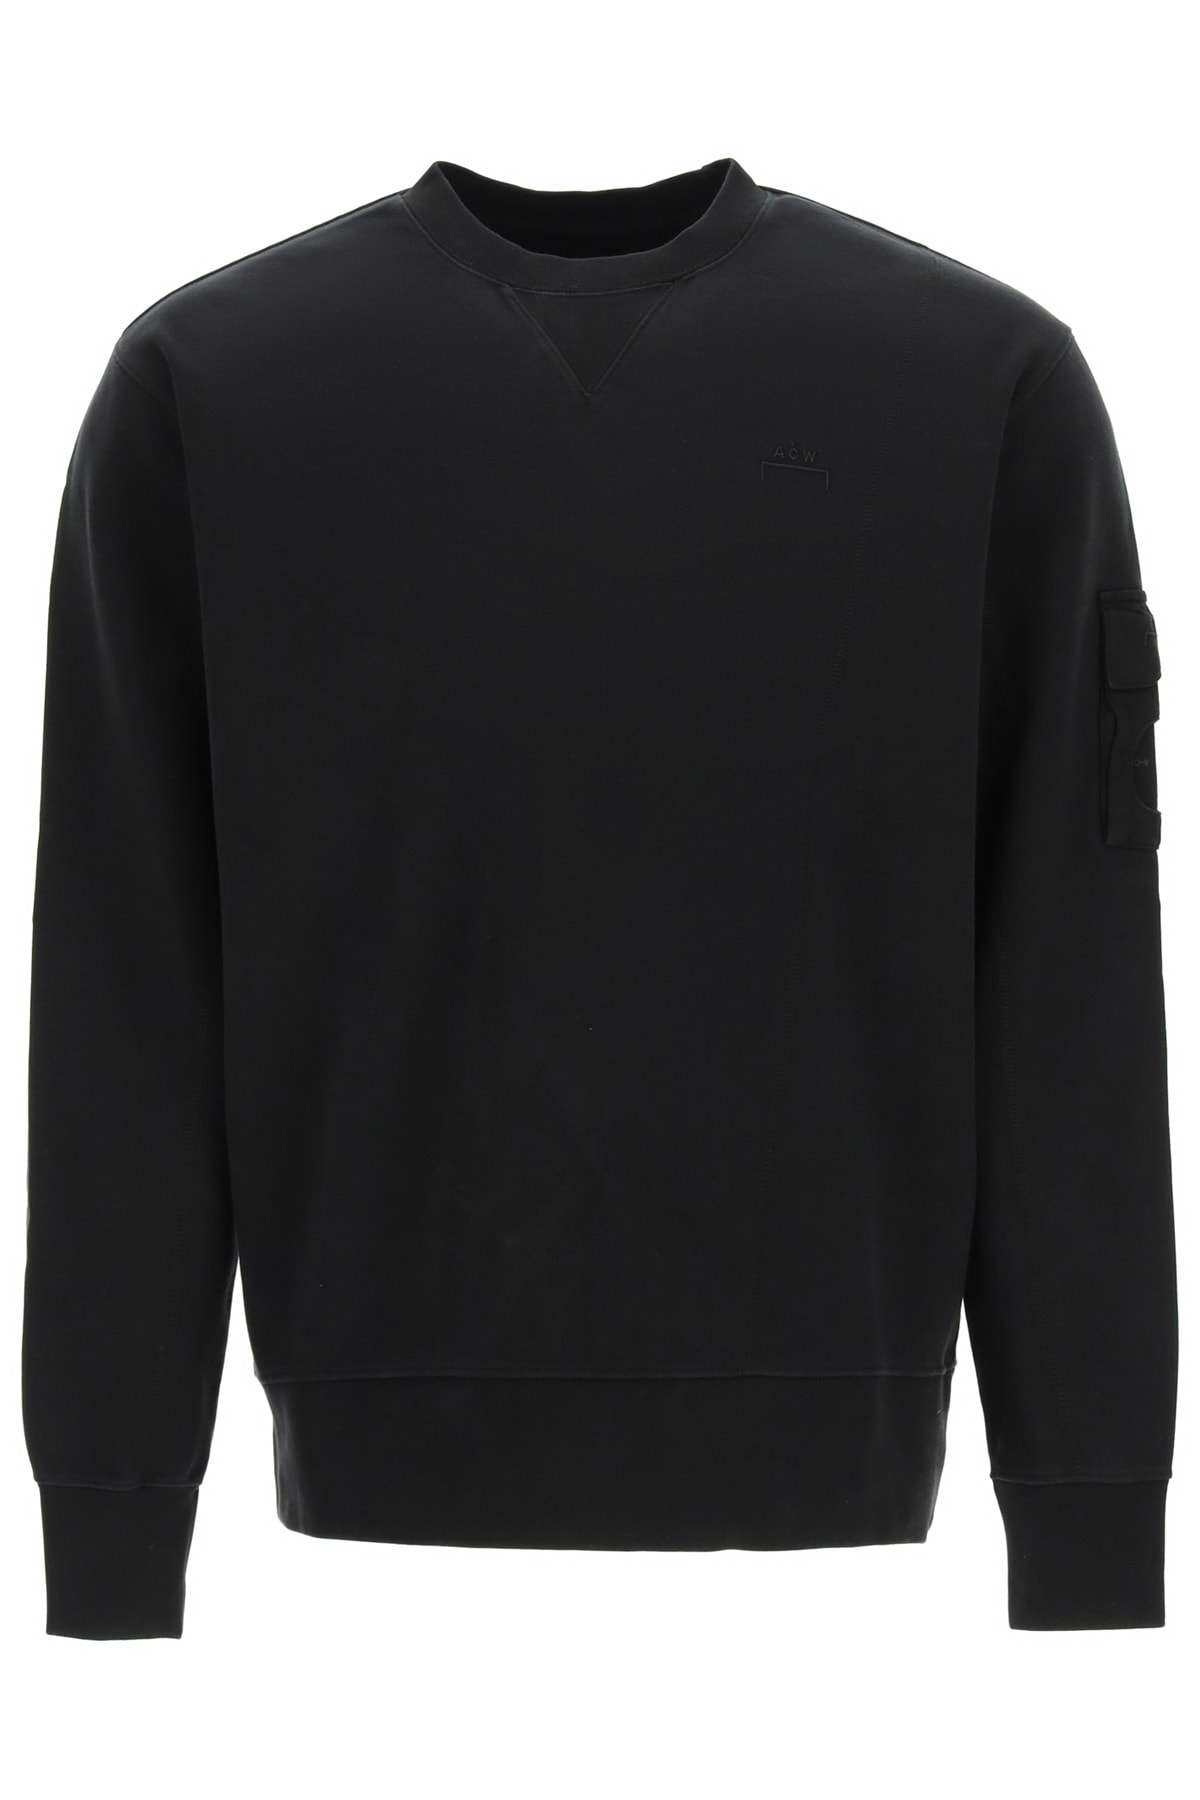 A-COLD-WALL Essentials Crewneck Sweatshirt With Logo Embroidery